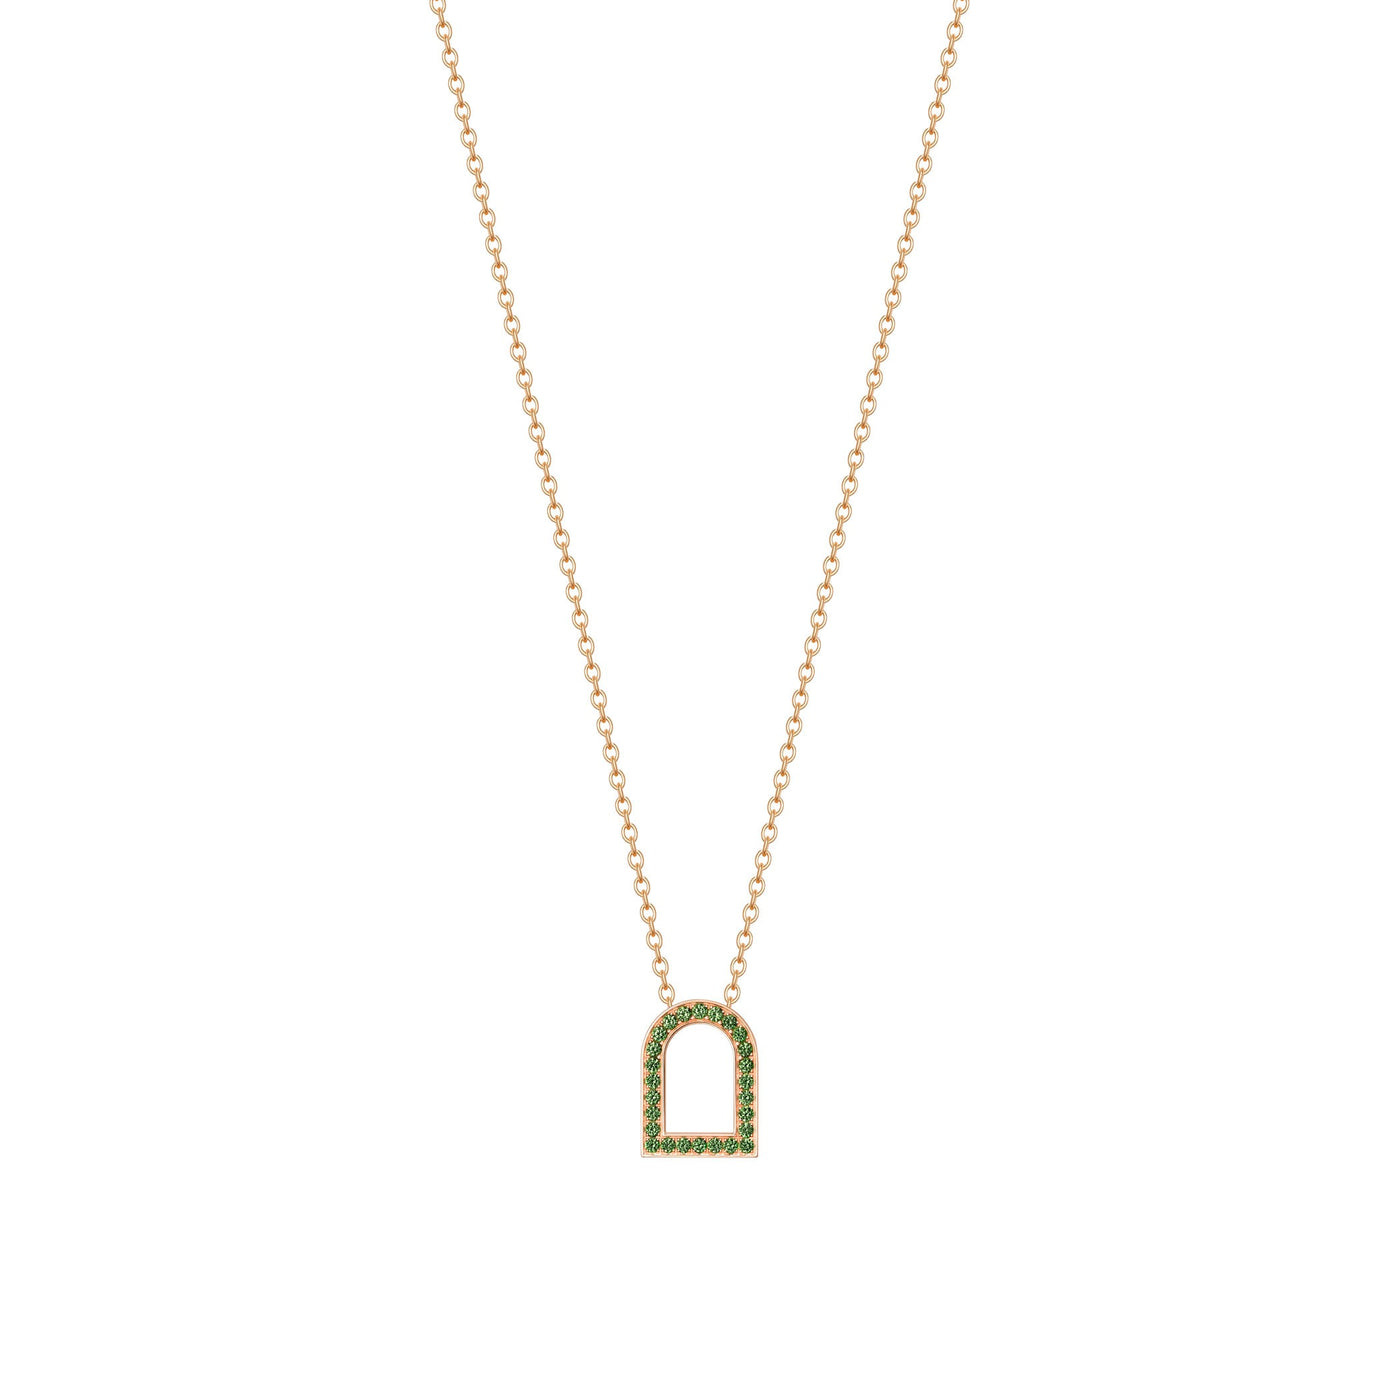 L'Arc Voyage Charm MM, 18k Rose Gold with Galerie Tsavorites on Chain Necklace - DAVIDOR